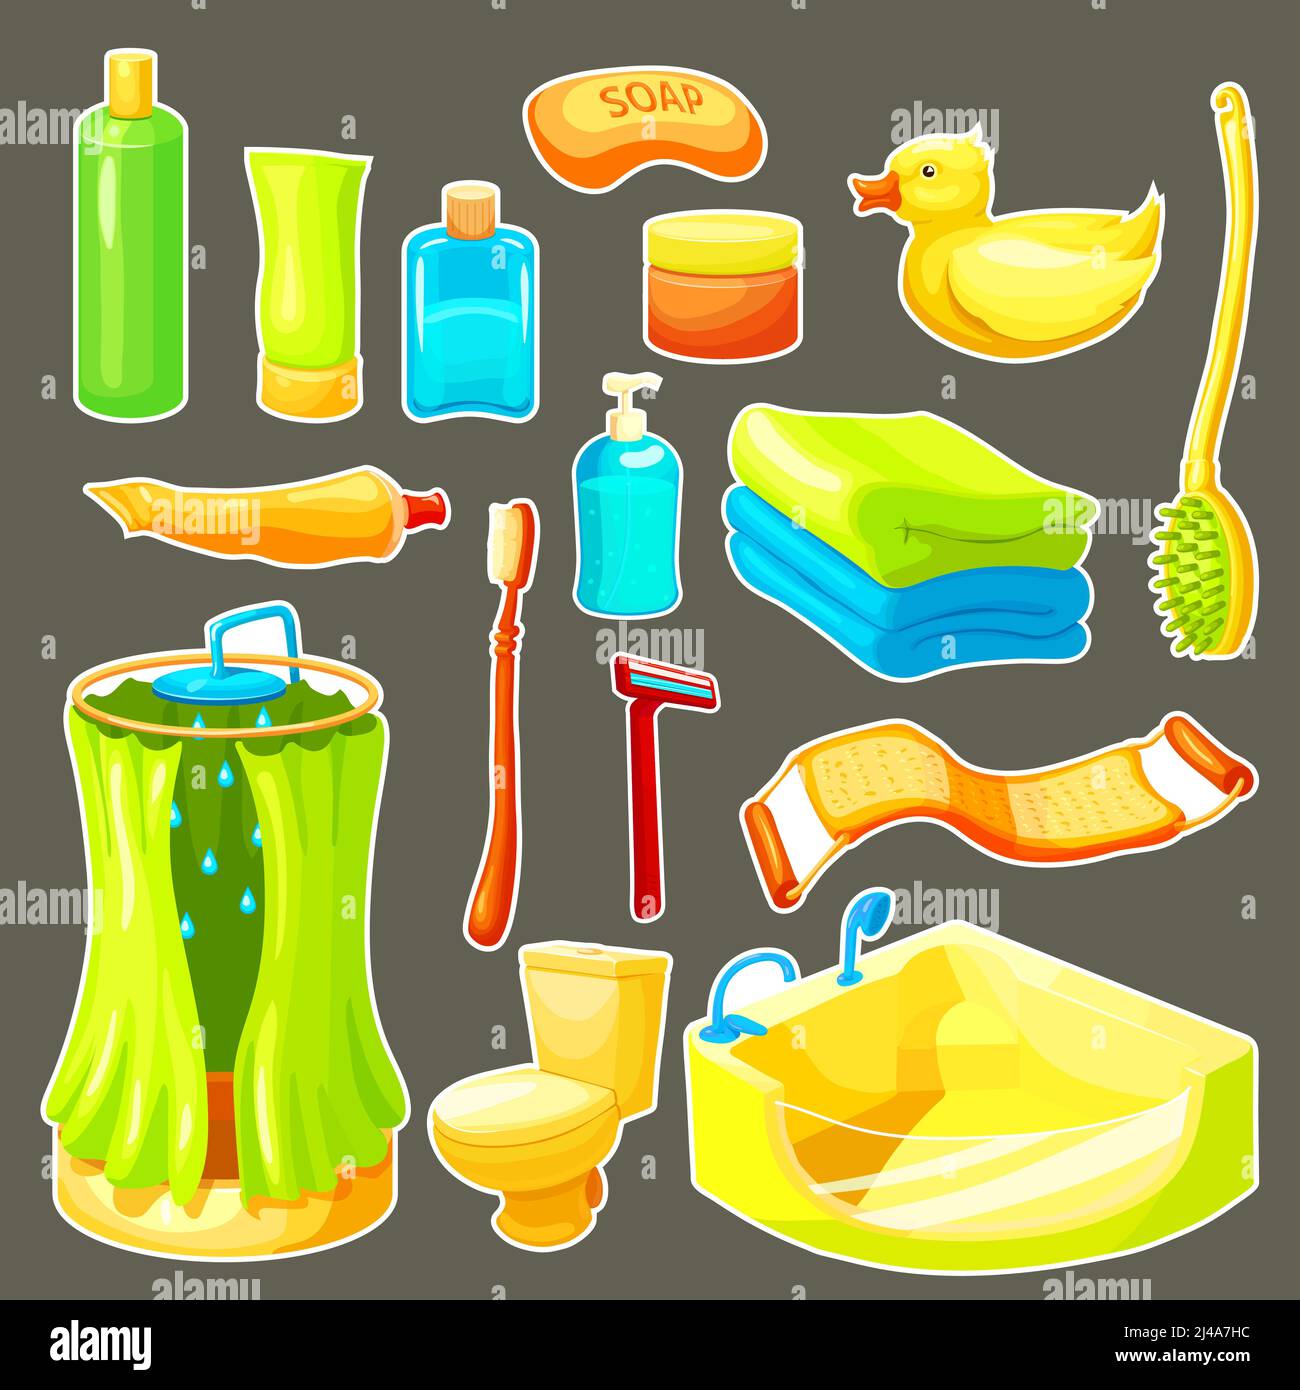 House thing icons set cartoon style Royalty Free Vector